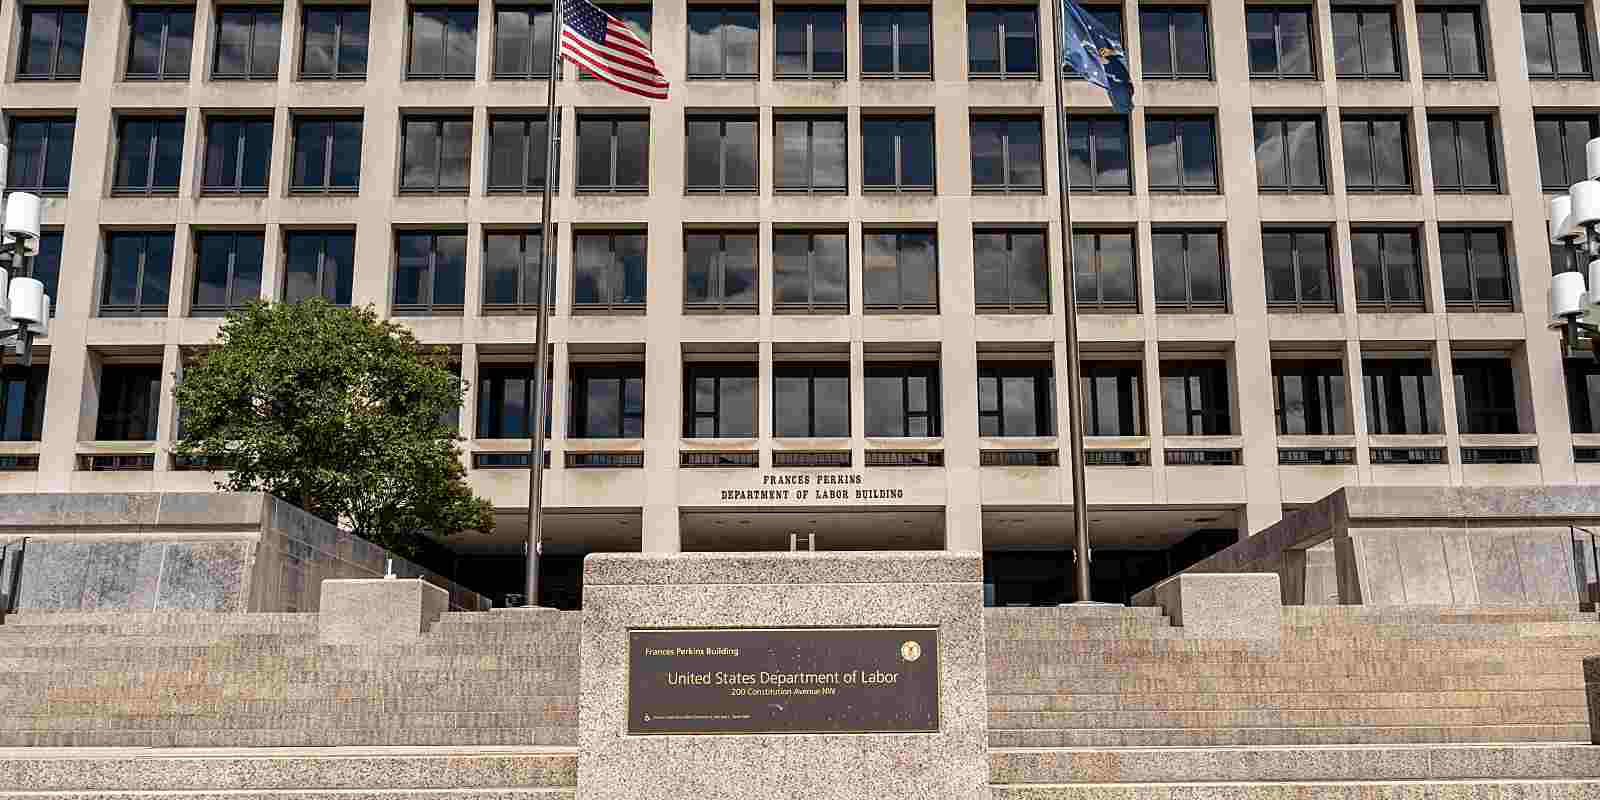 department of labor front of the building in washington dc